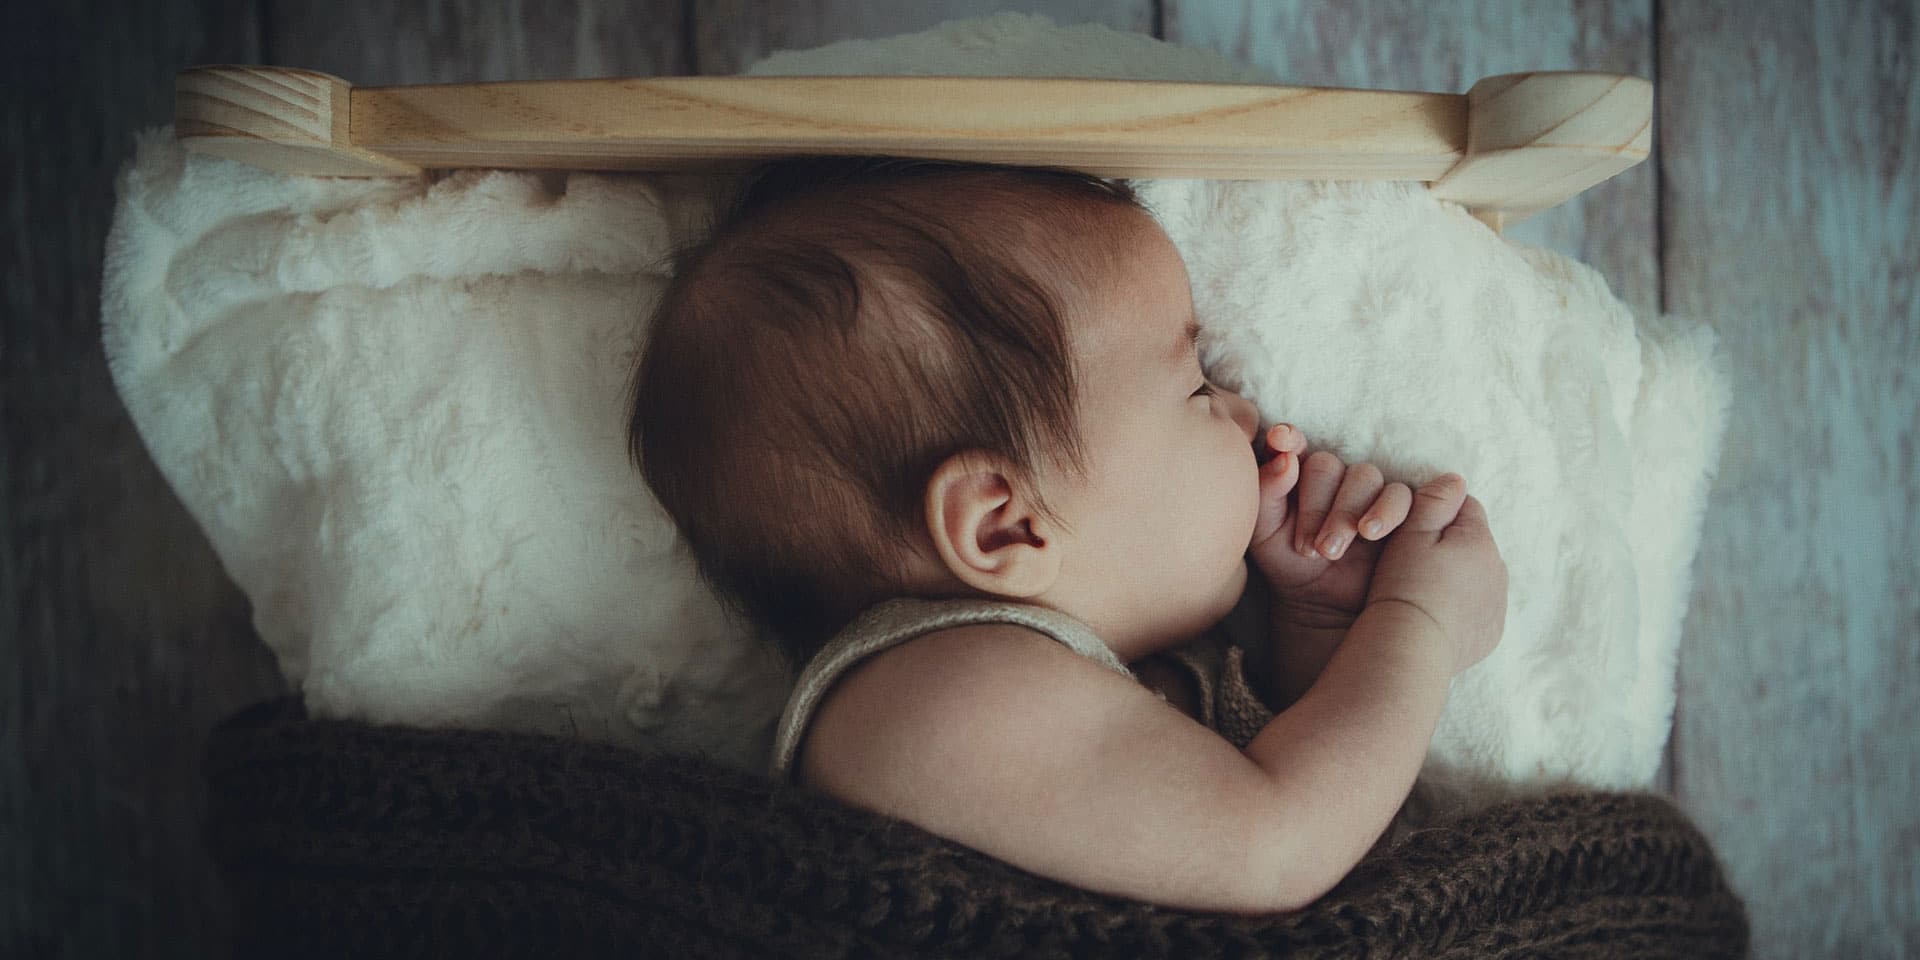 A peaceful infant asleep on a soft white blanket, cradled in a rustic wooden crib, with tiny hands gently resting by the face, conjuring a metaphysical serenity in the room.